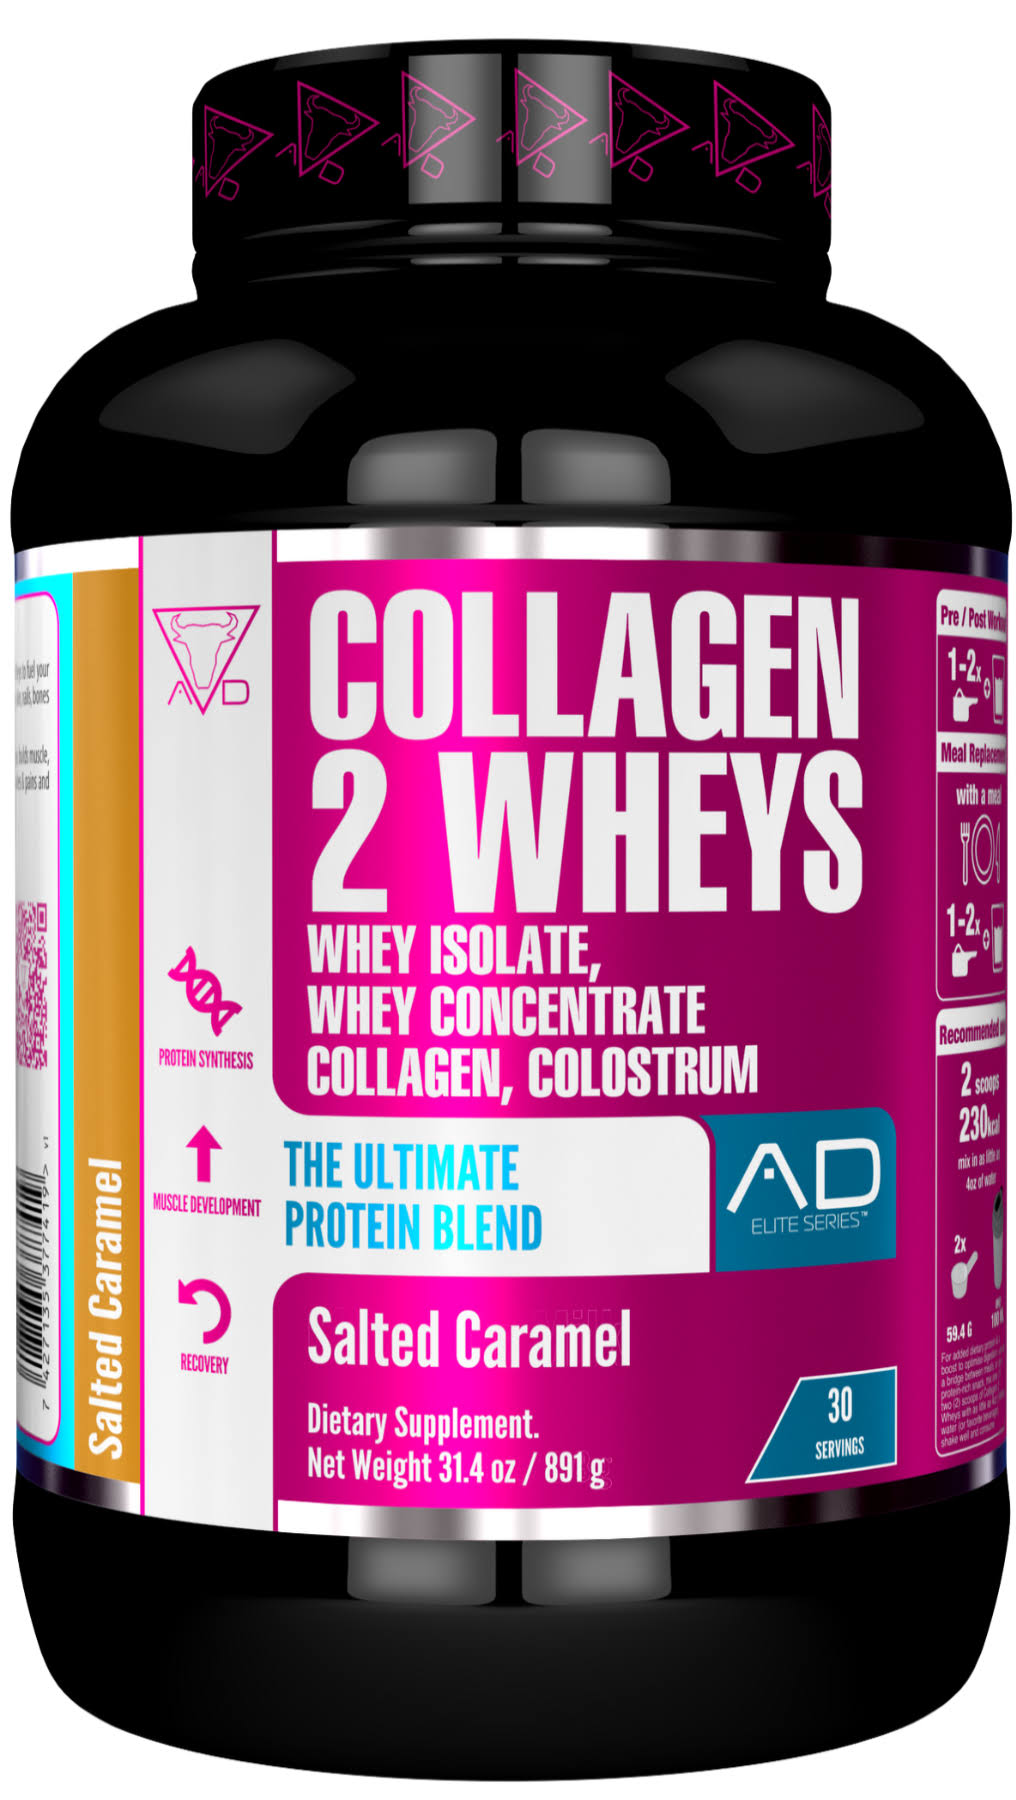 Project Ad Collagen 2 Wheys Salted Caramel - 30 Servings